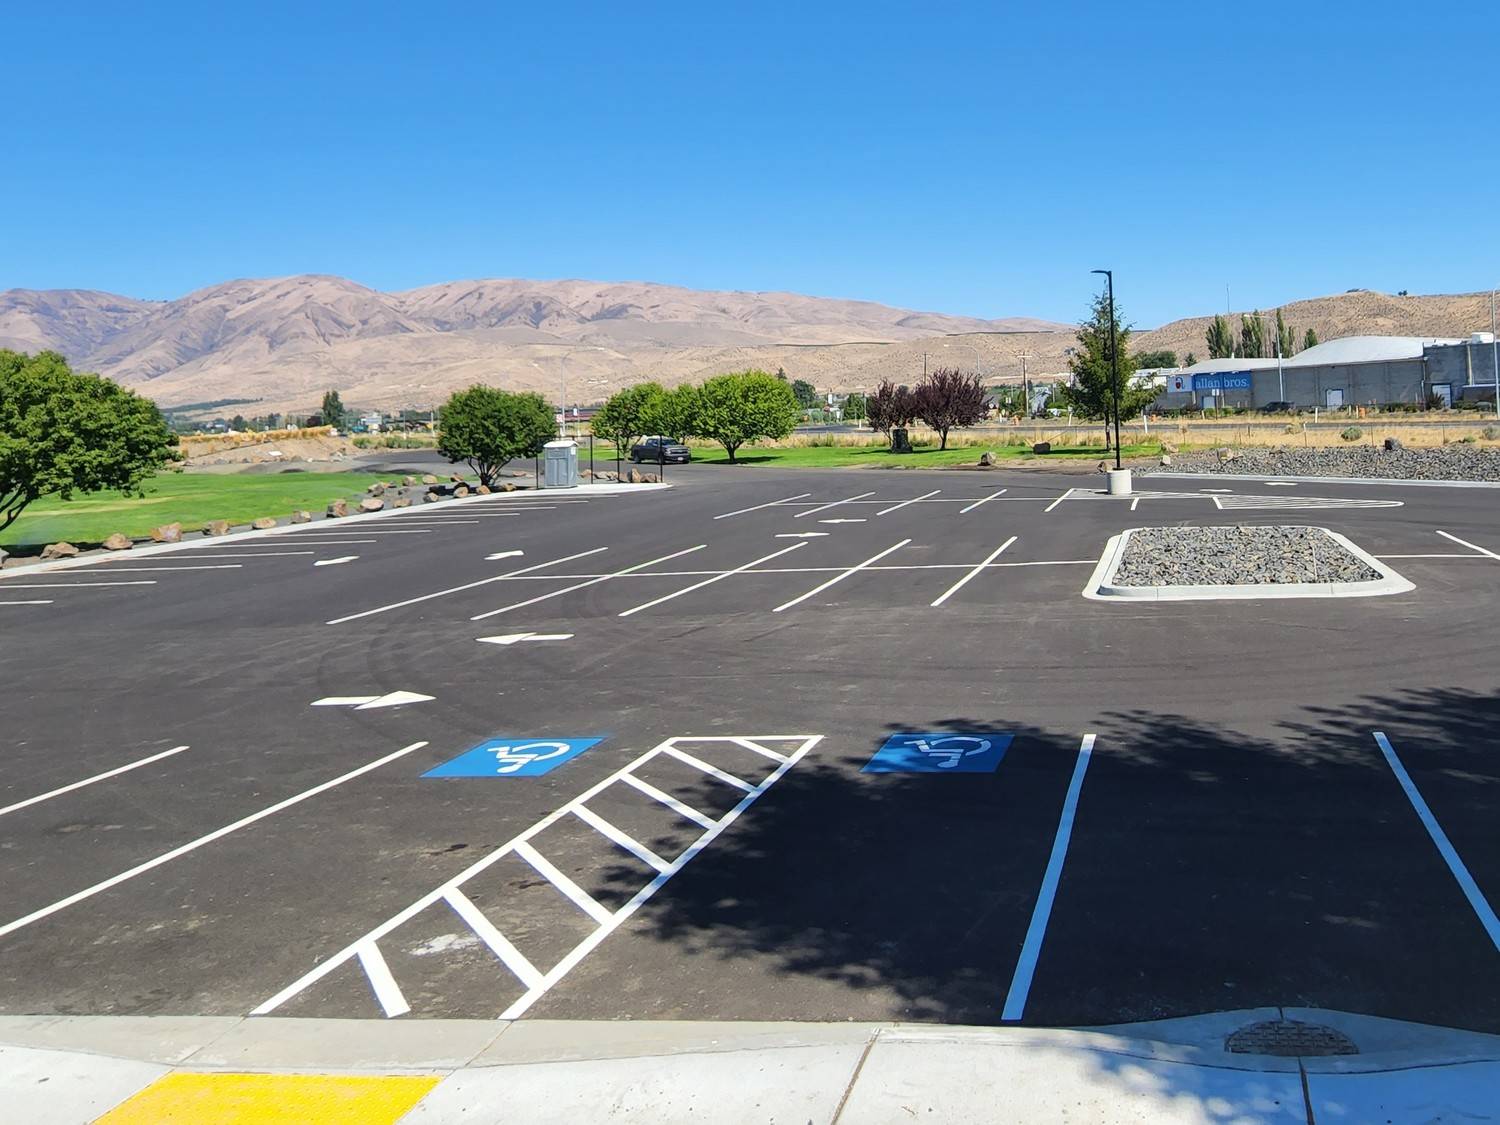 Naches - Cleman’s View Park – Park and Ride